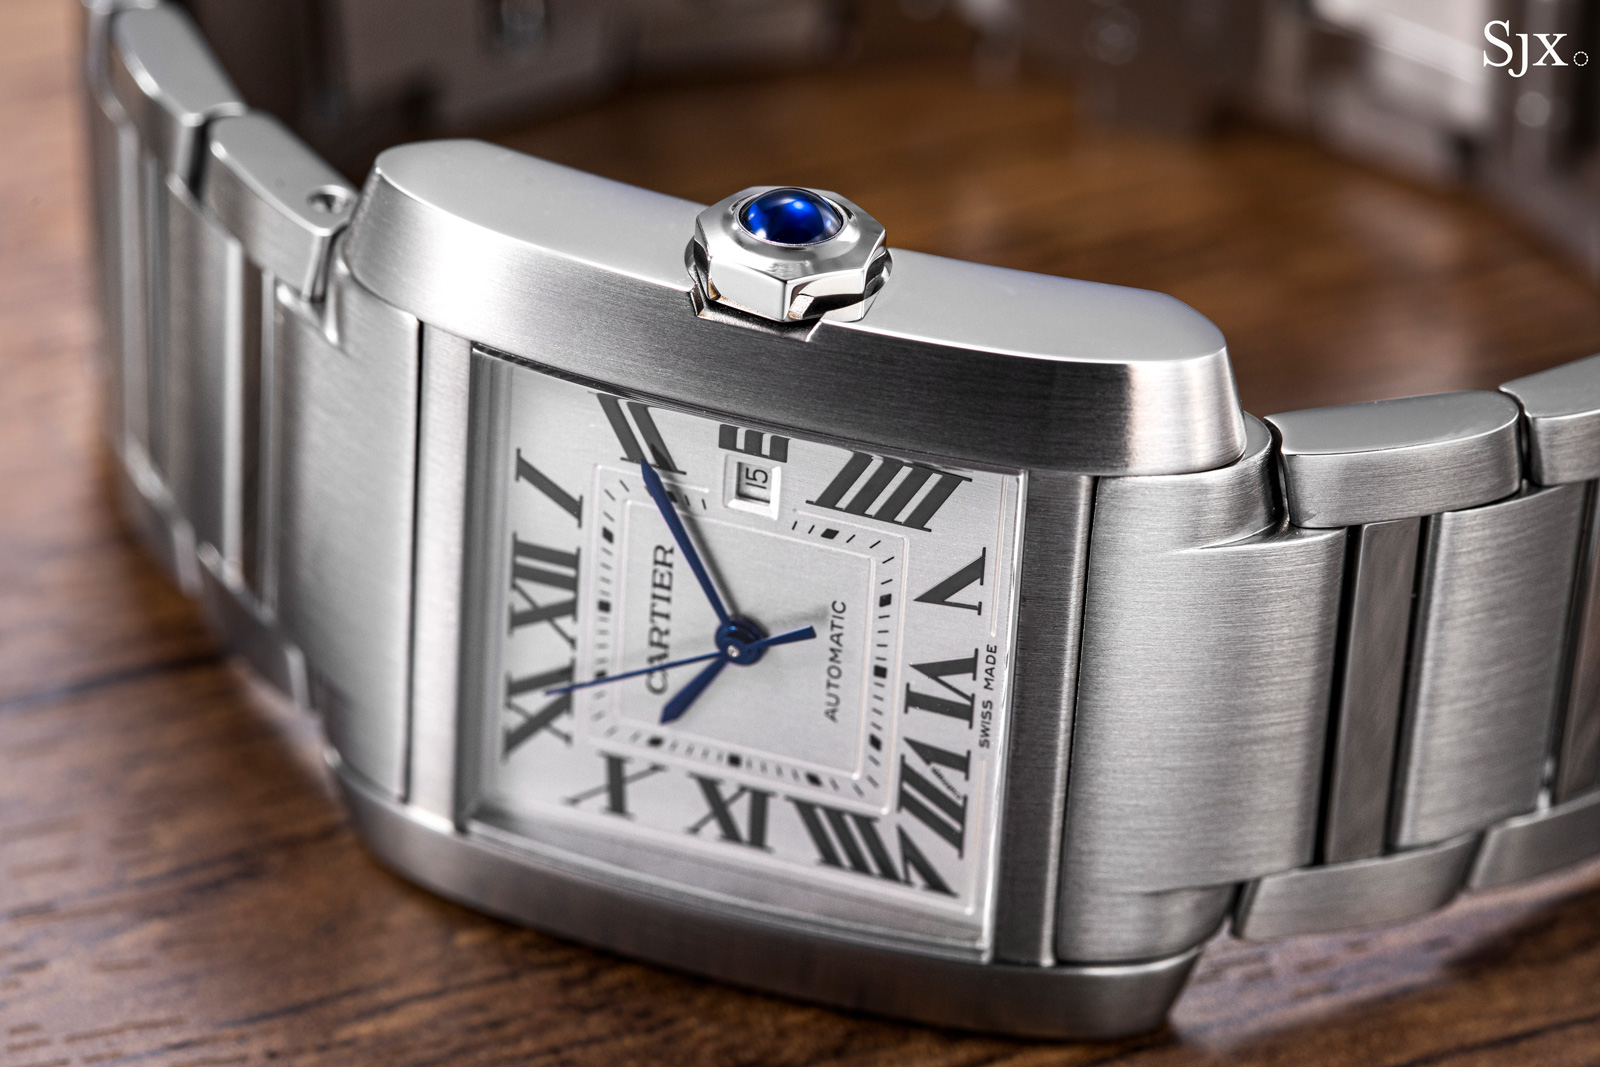 Cartier Tank Francaise Watch Is More Popular Than Ever